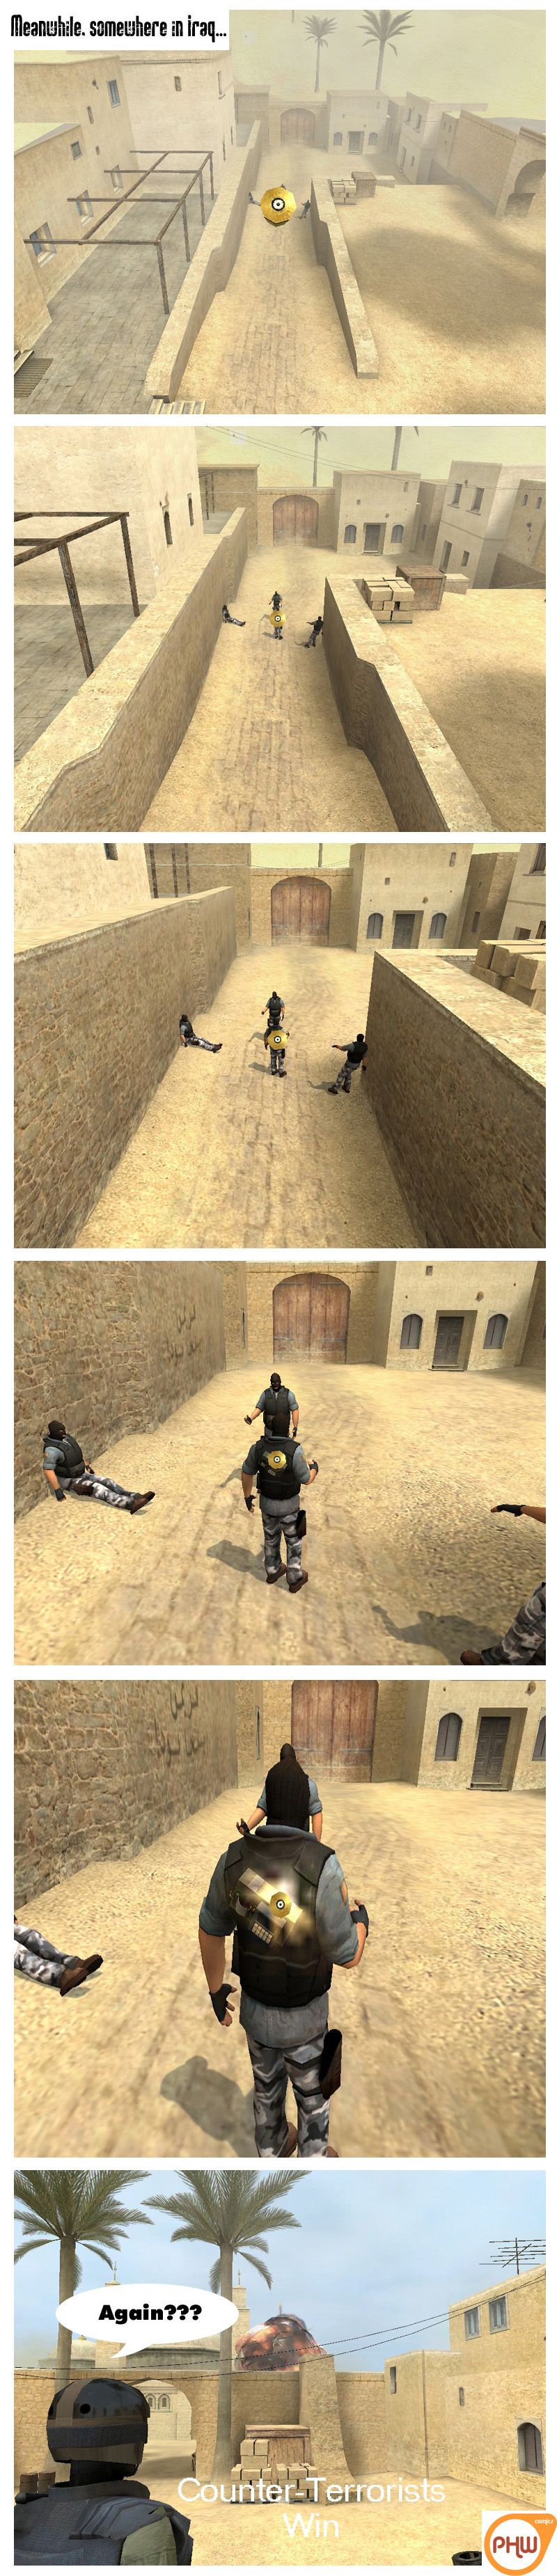 Meanwhile, somewhere in Iraq, Secret Agent Whiskey's misfired bullet is falling down towards the ground, directly at a terrorist who has a C4 bomb on his back. Suddenly, an explosion occur and a message appears saying that Counter-Terrorists win. Confused, a counter-terrorist asks again. The end.